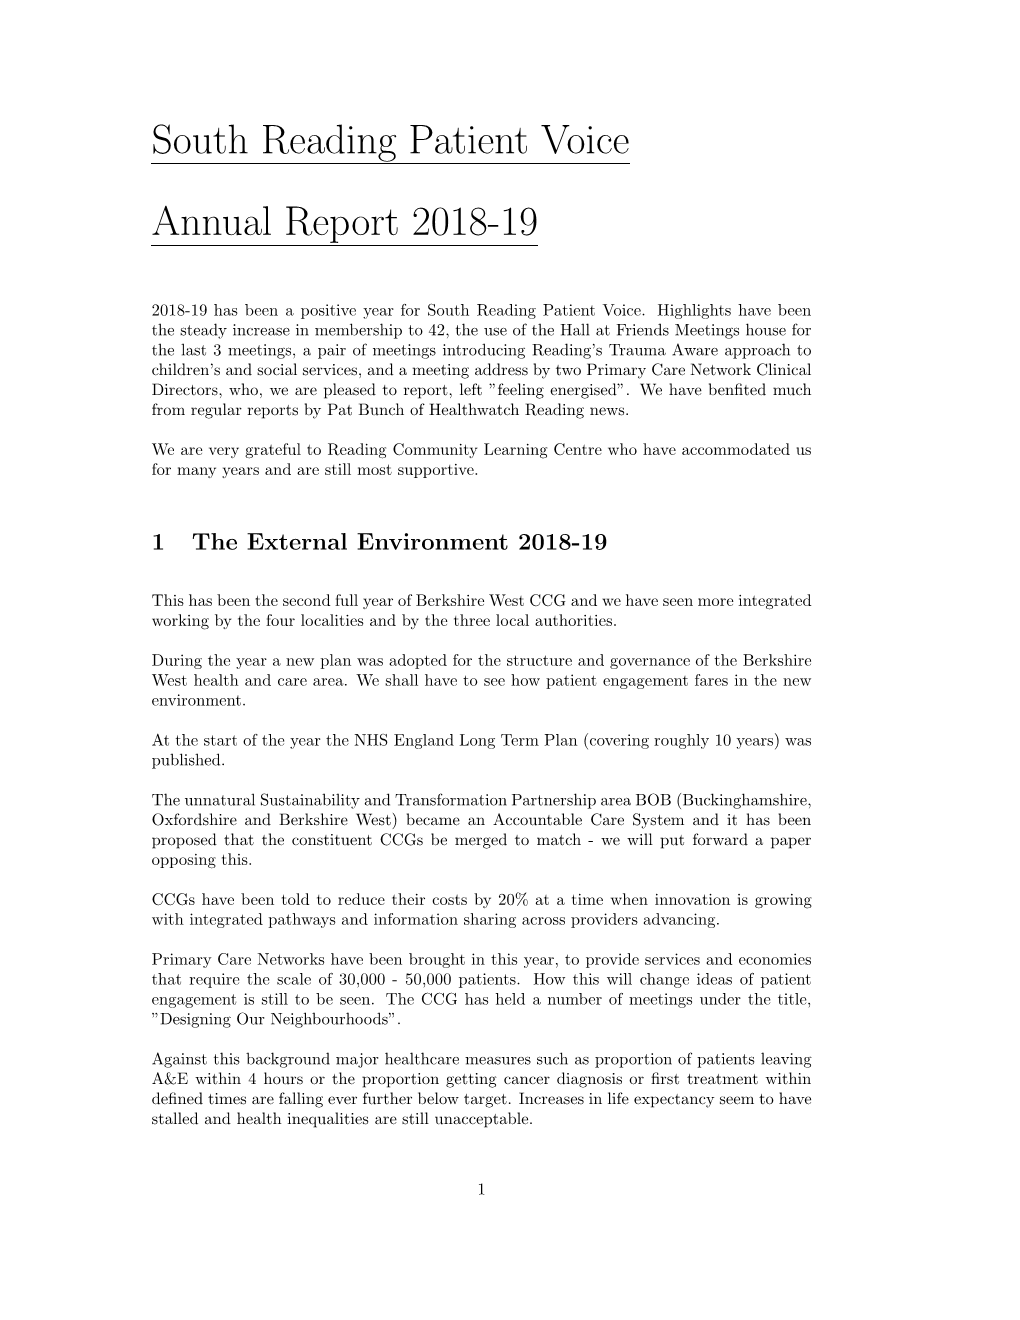 South Reading Patient Voice Annual Report 2018-19